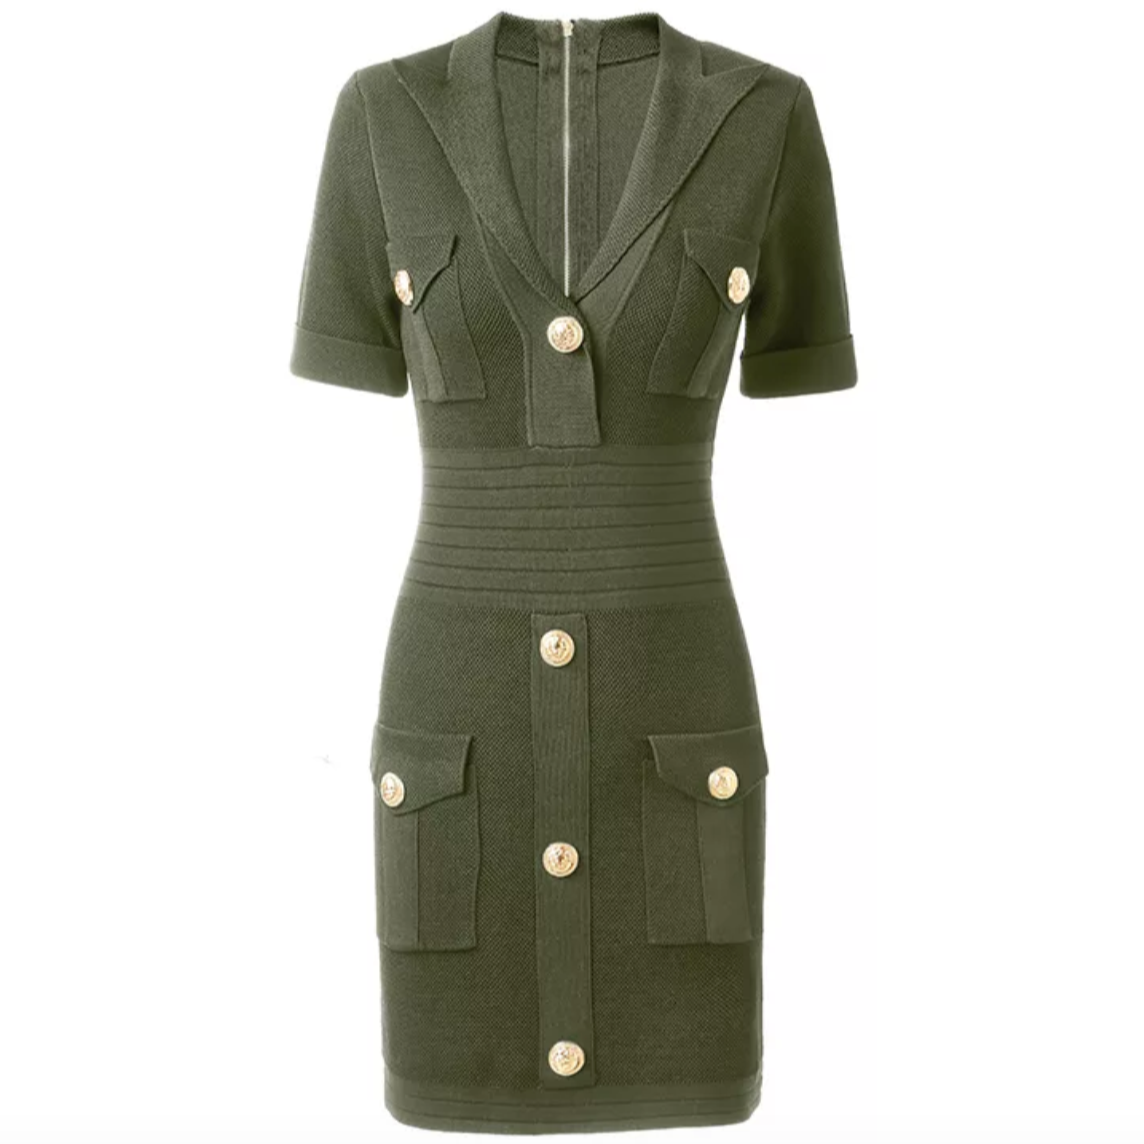 The Natalynska Masha dress is a stunning short sleeved bodycon evening dress with banding detail at the centre to cinch in the waist and gold button detailing balmain inspired mini dress